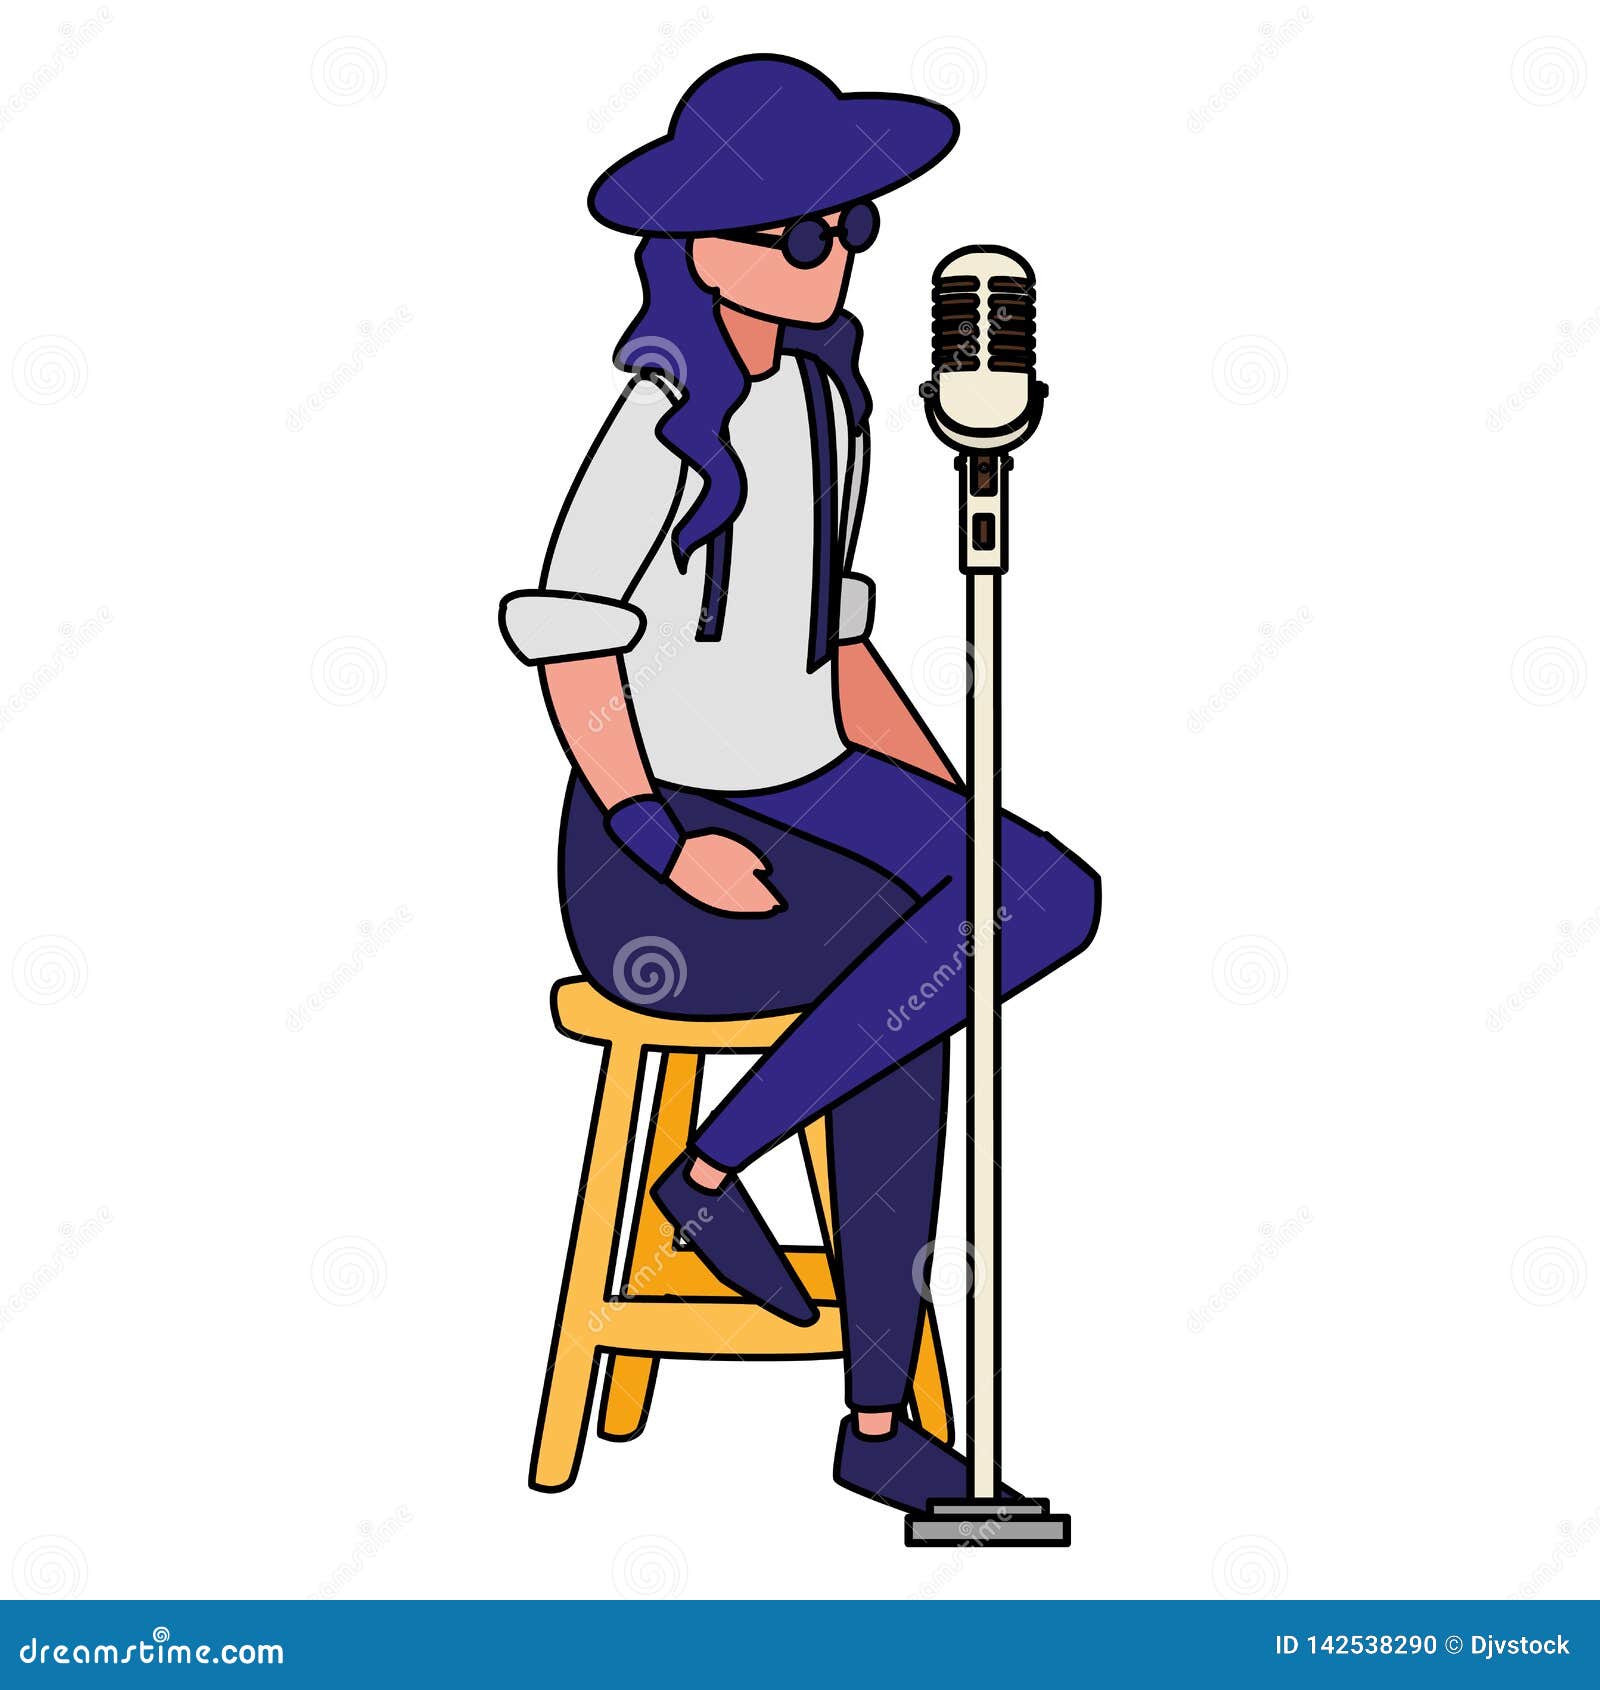 Singer With Microphone Character Stock Vector Illustration Of Character Cartoon 142538290